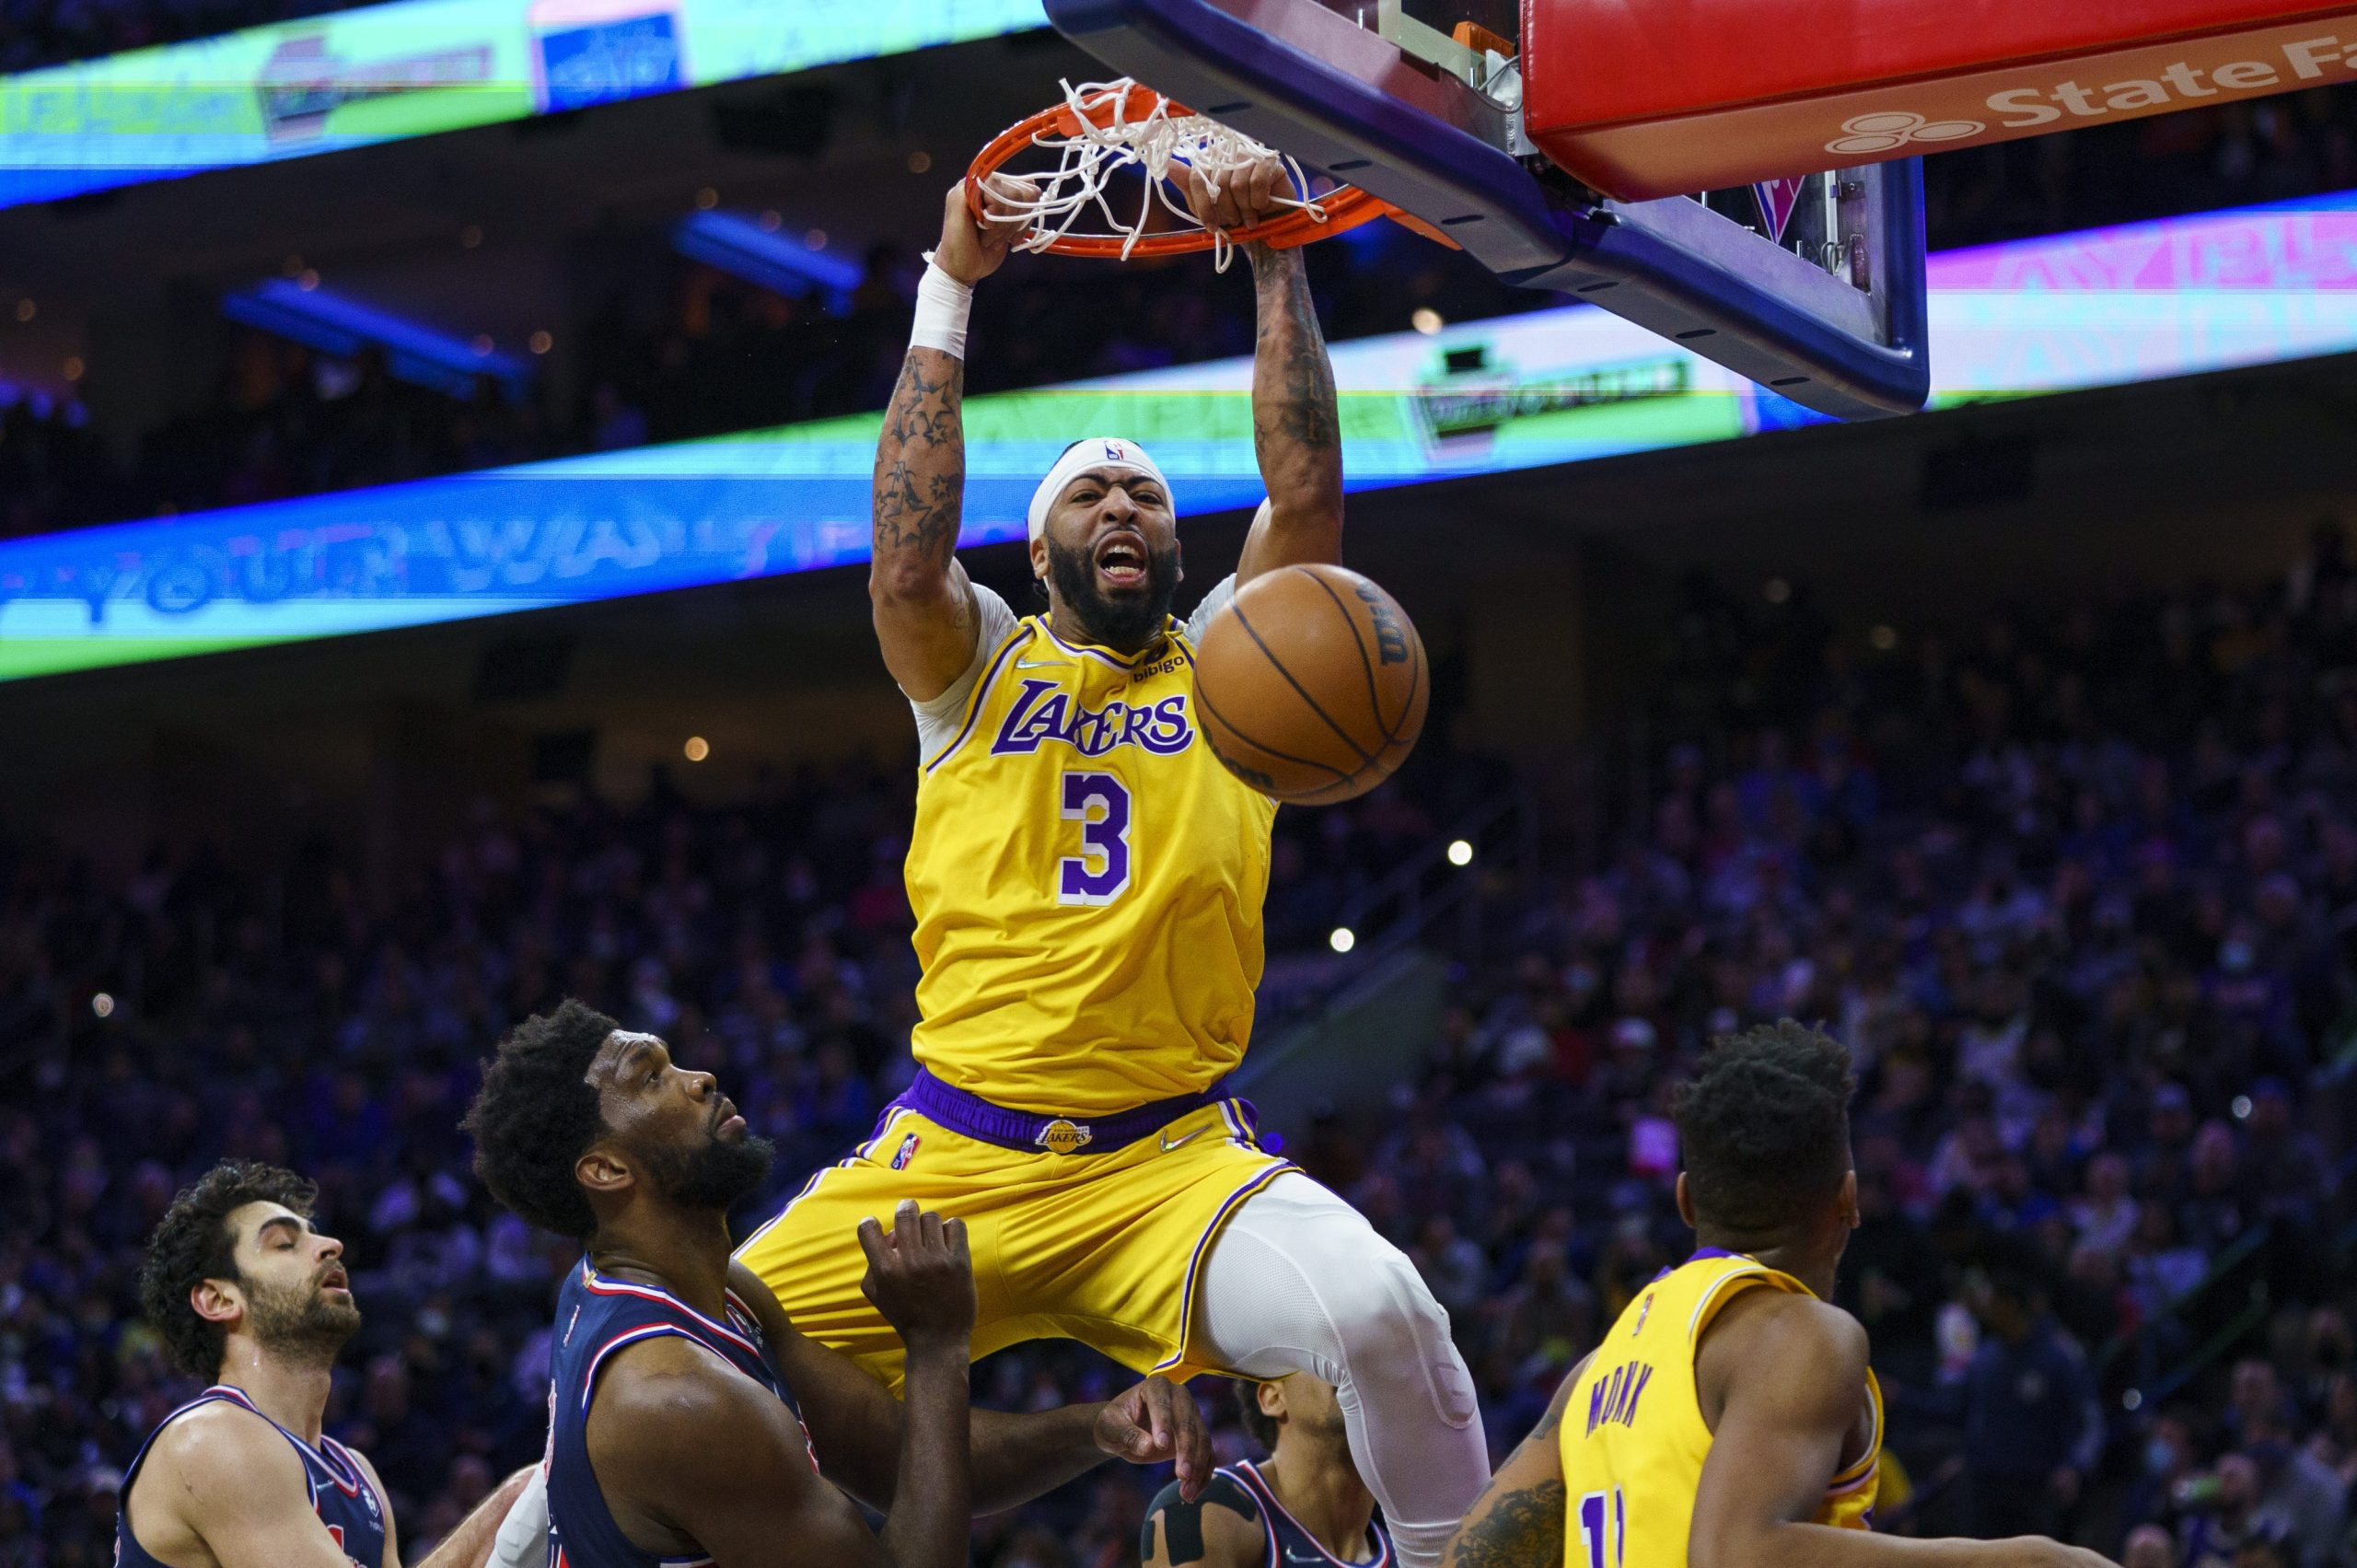 NBA Tuesday parlay at mega (+891 odds) for 12/6: Can't ignore the Lakers